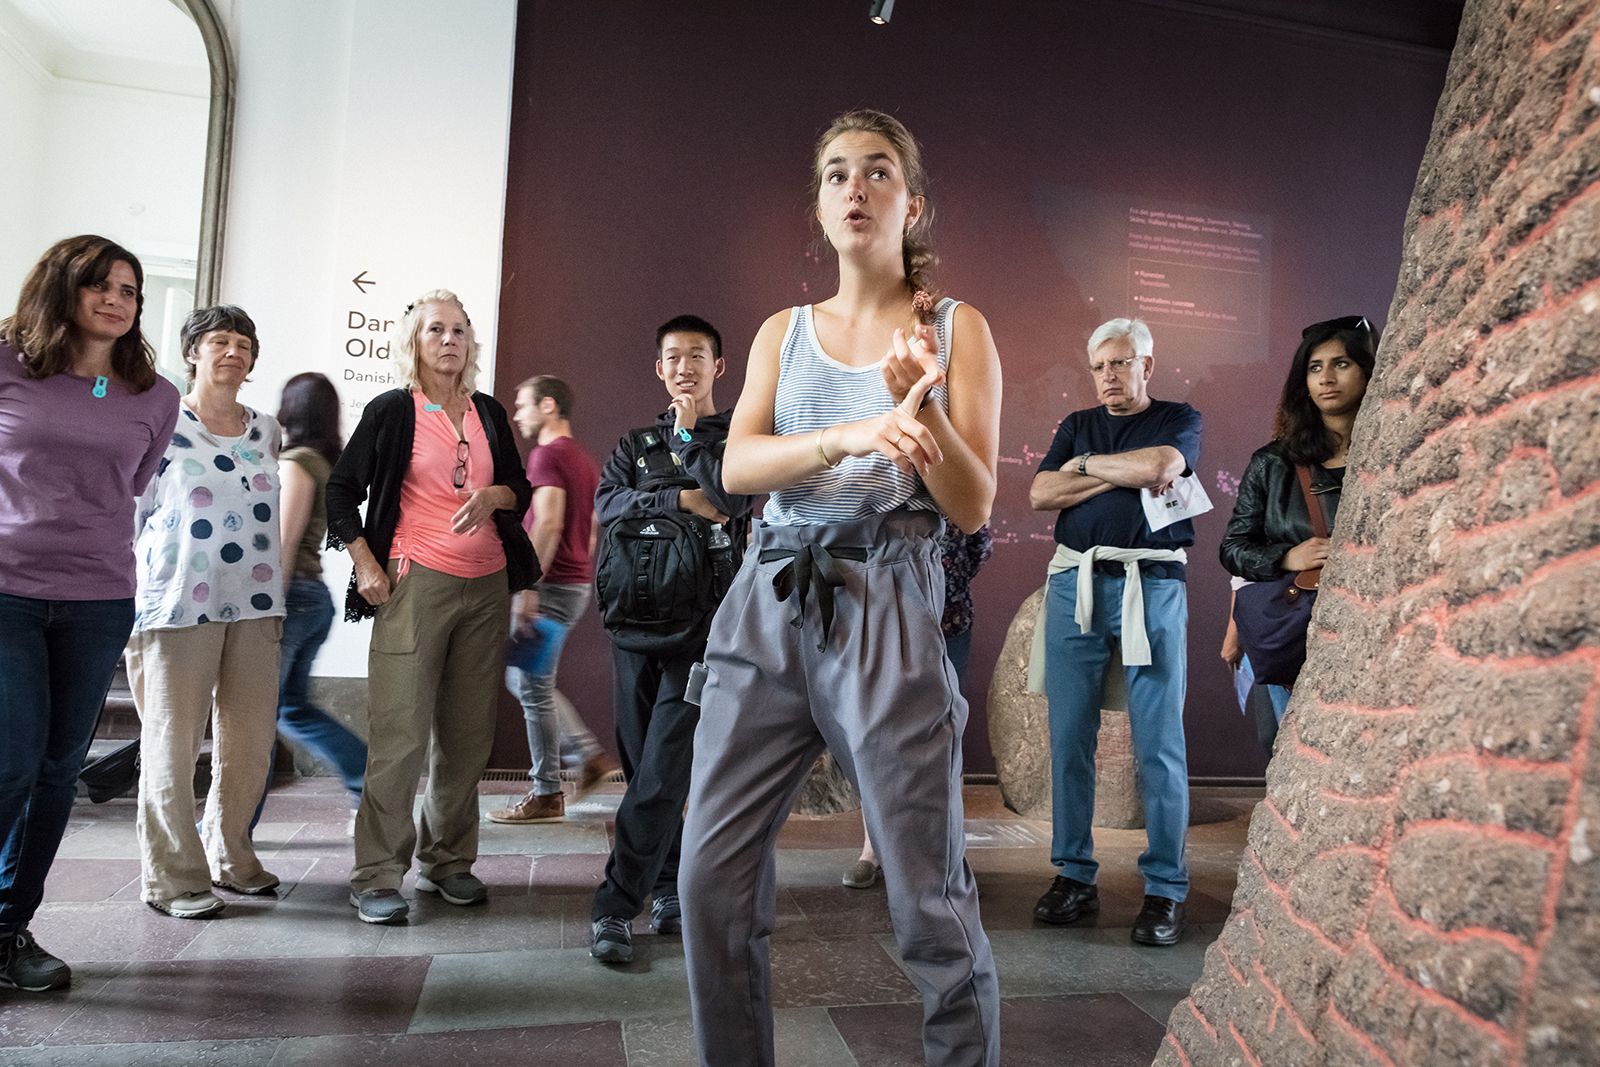 28 April: ‘Meet the Danes’ guided tour at the National Museum